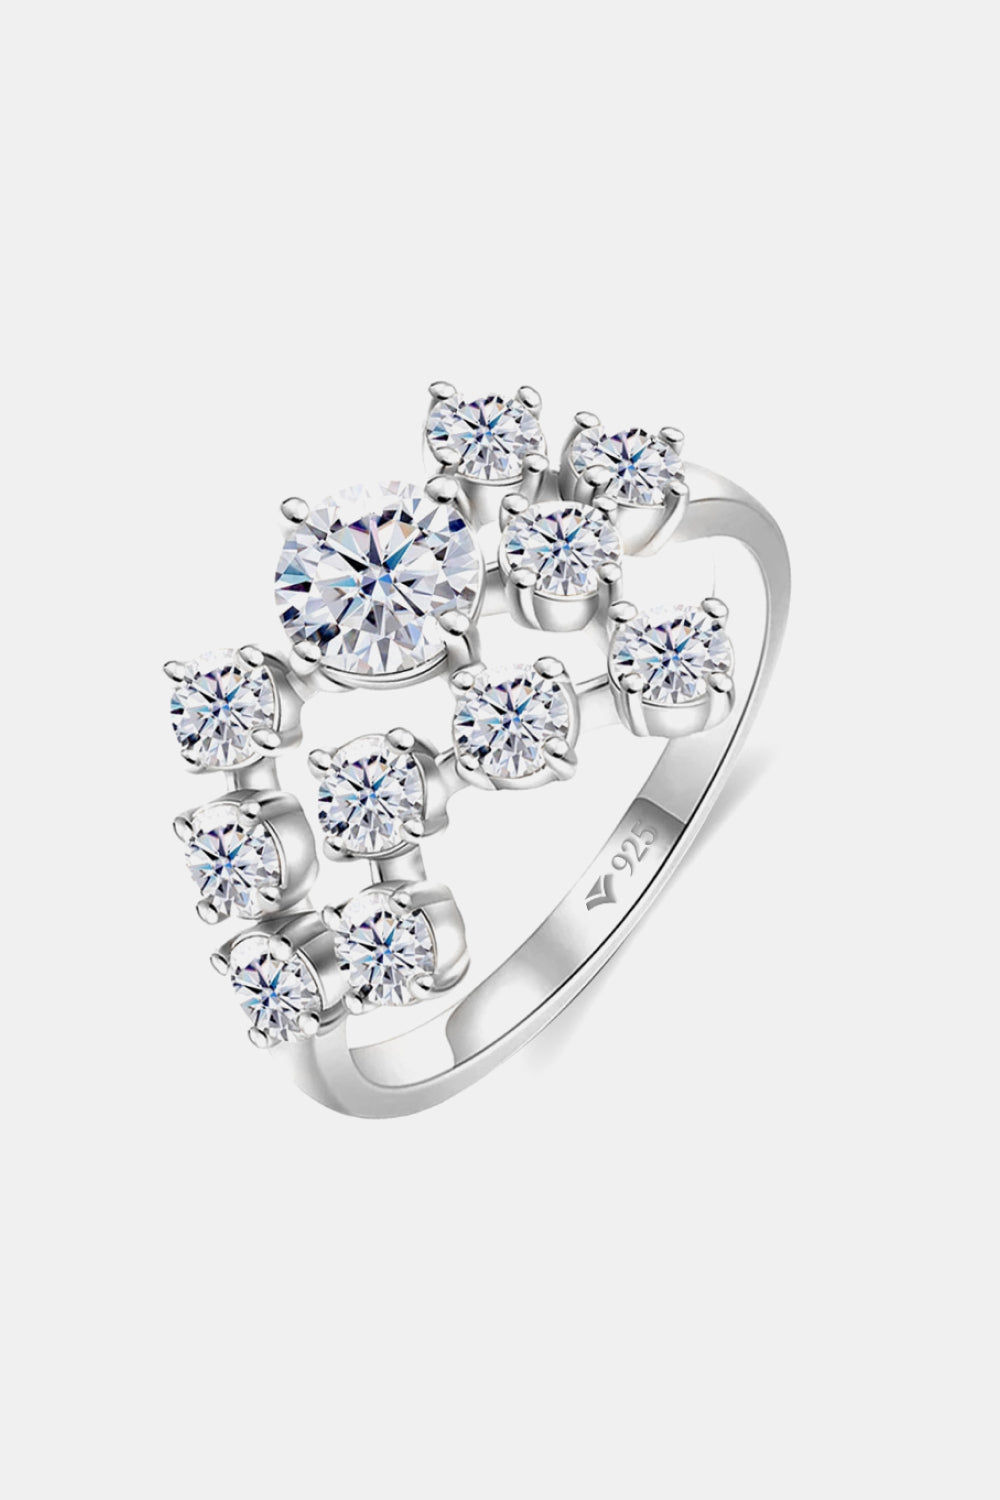 1.2 Carat Moissanite 925 Sterling Silver Ring-Rings-Inspired by Justeen-Women's Clothing Boutique